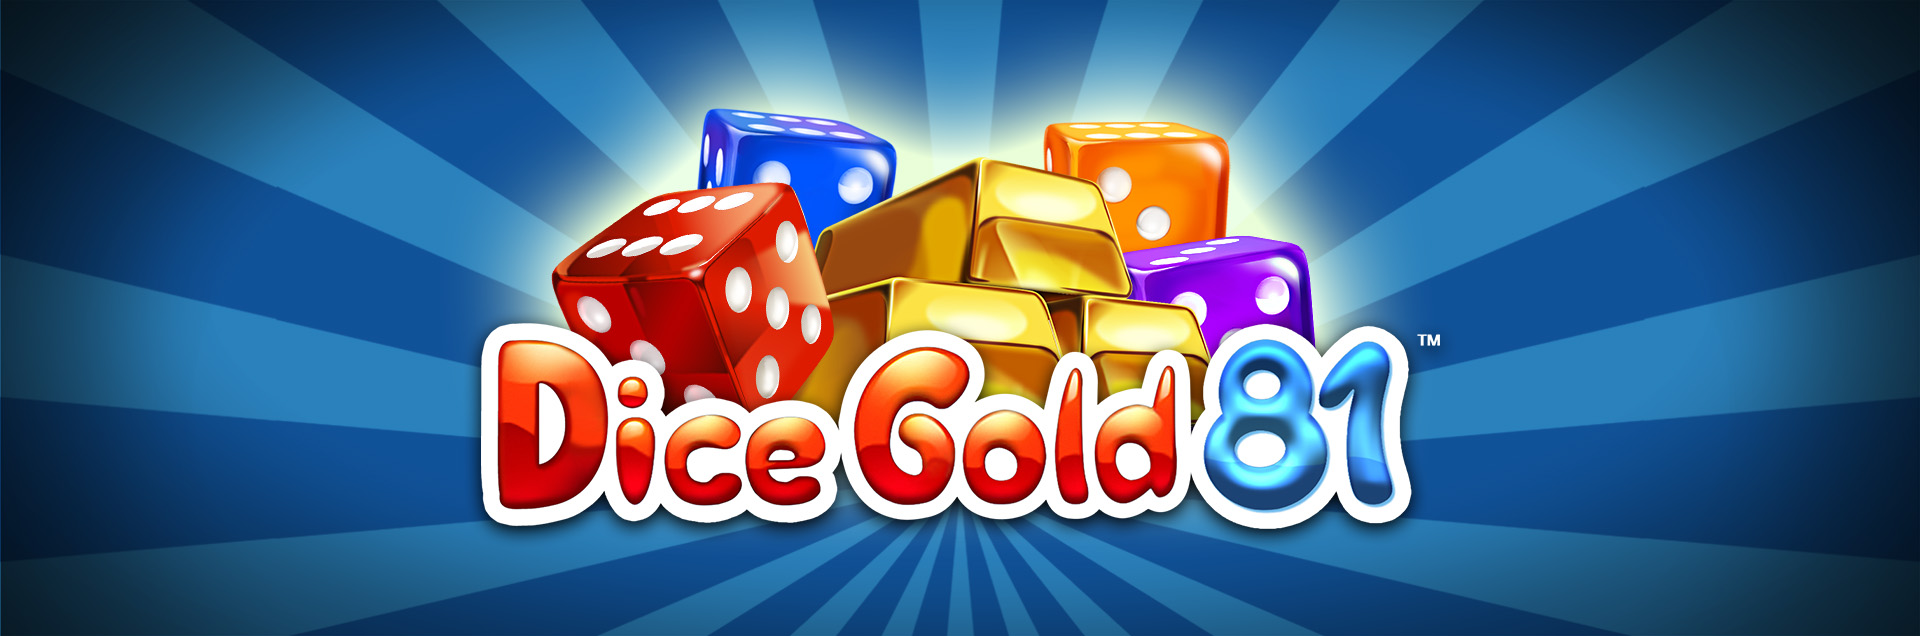 Dice Gold 81 Homepage